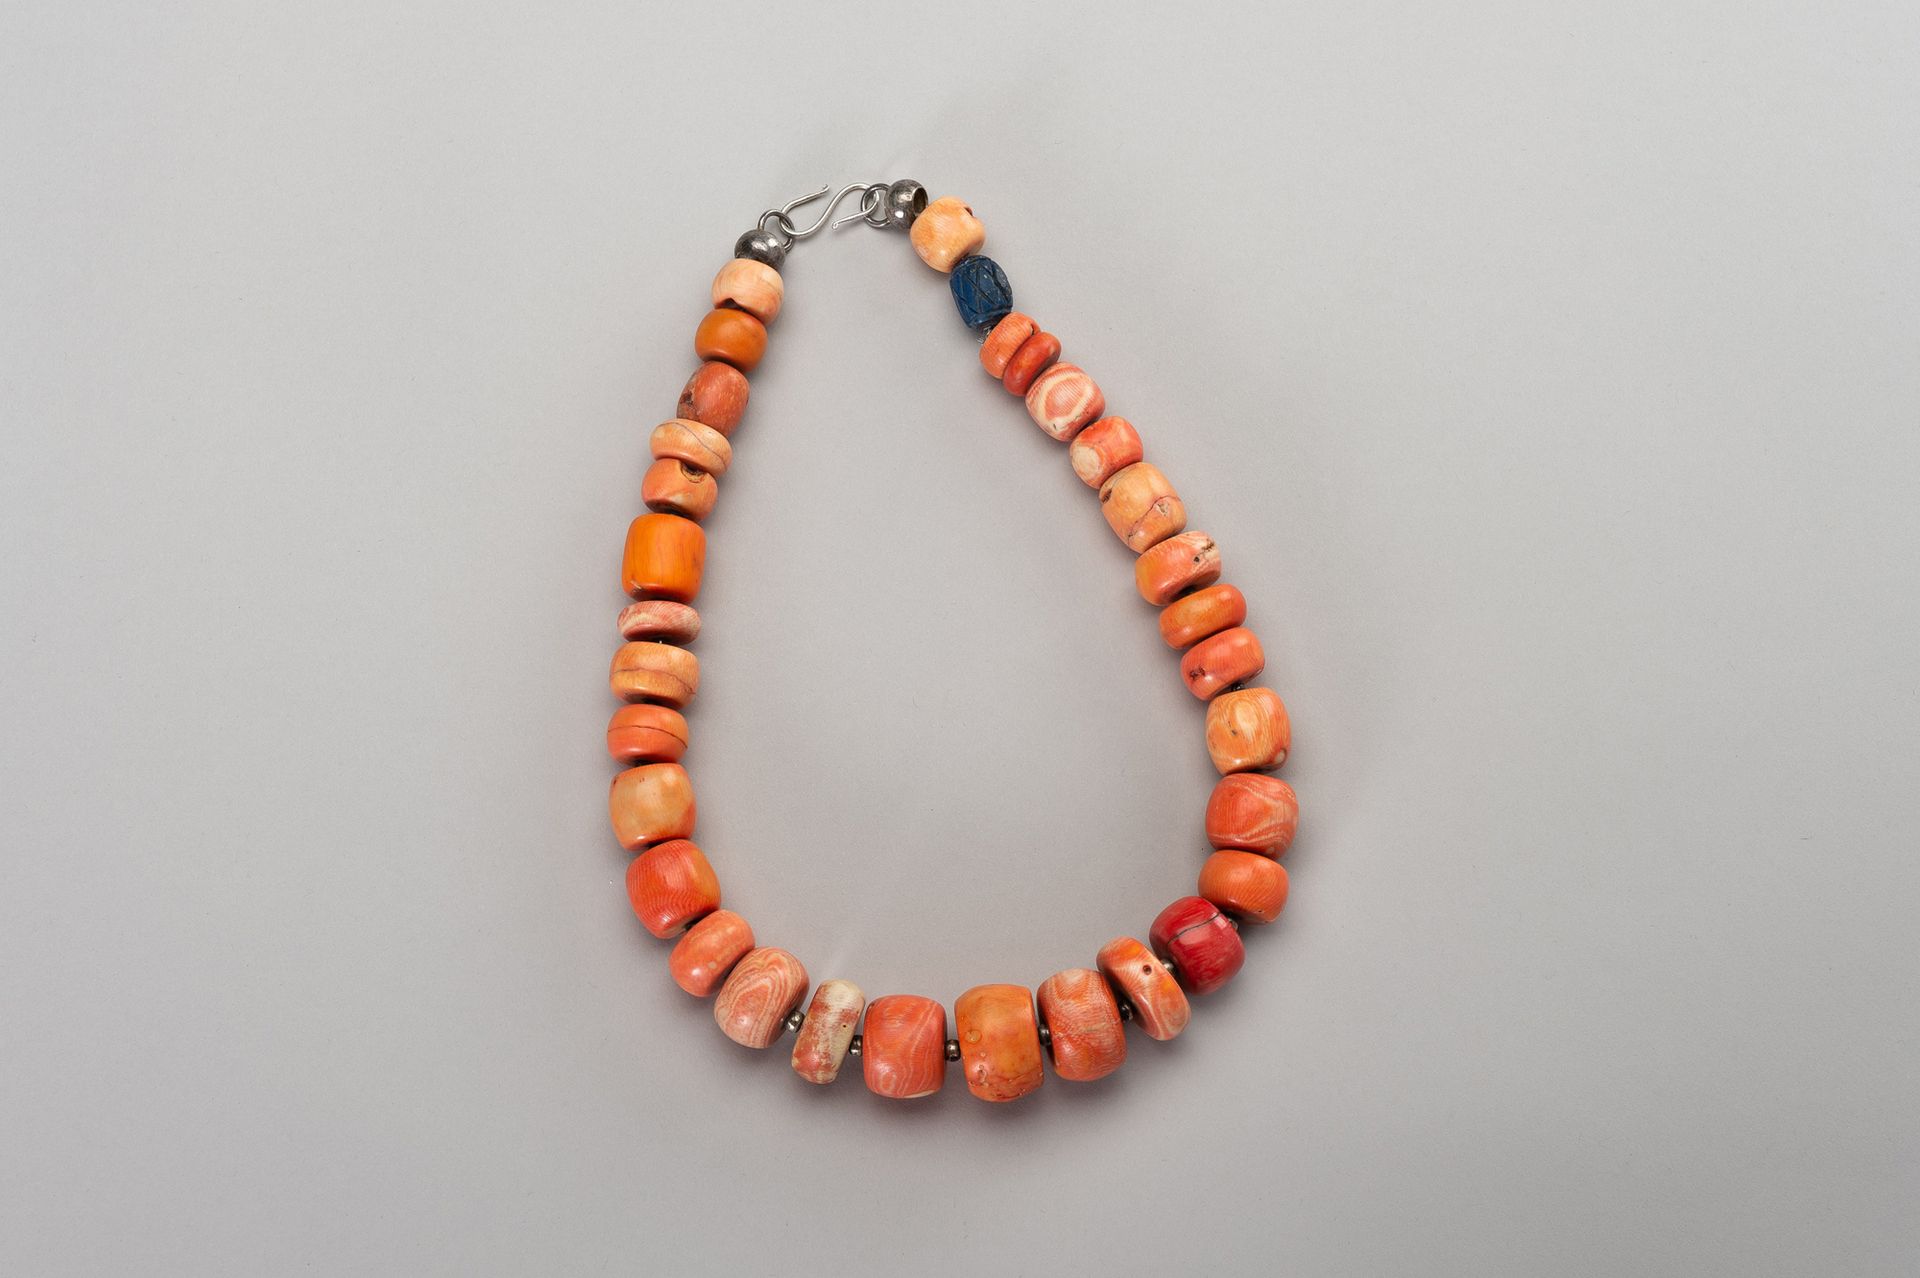 A CORAL NECKLACE WITH EXPERTISE A CORAL NECKLACE WITH EXPERTISE
Tibet, 1900 to 1&hellip;